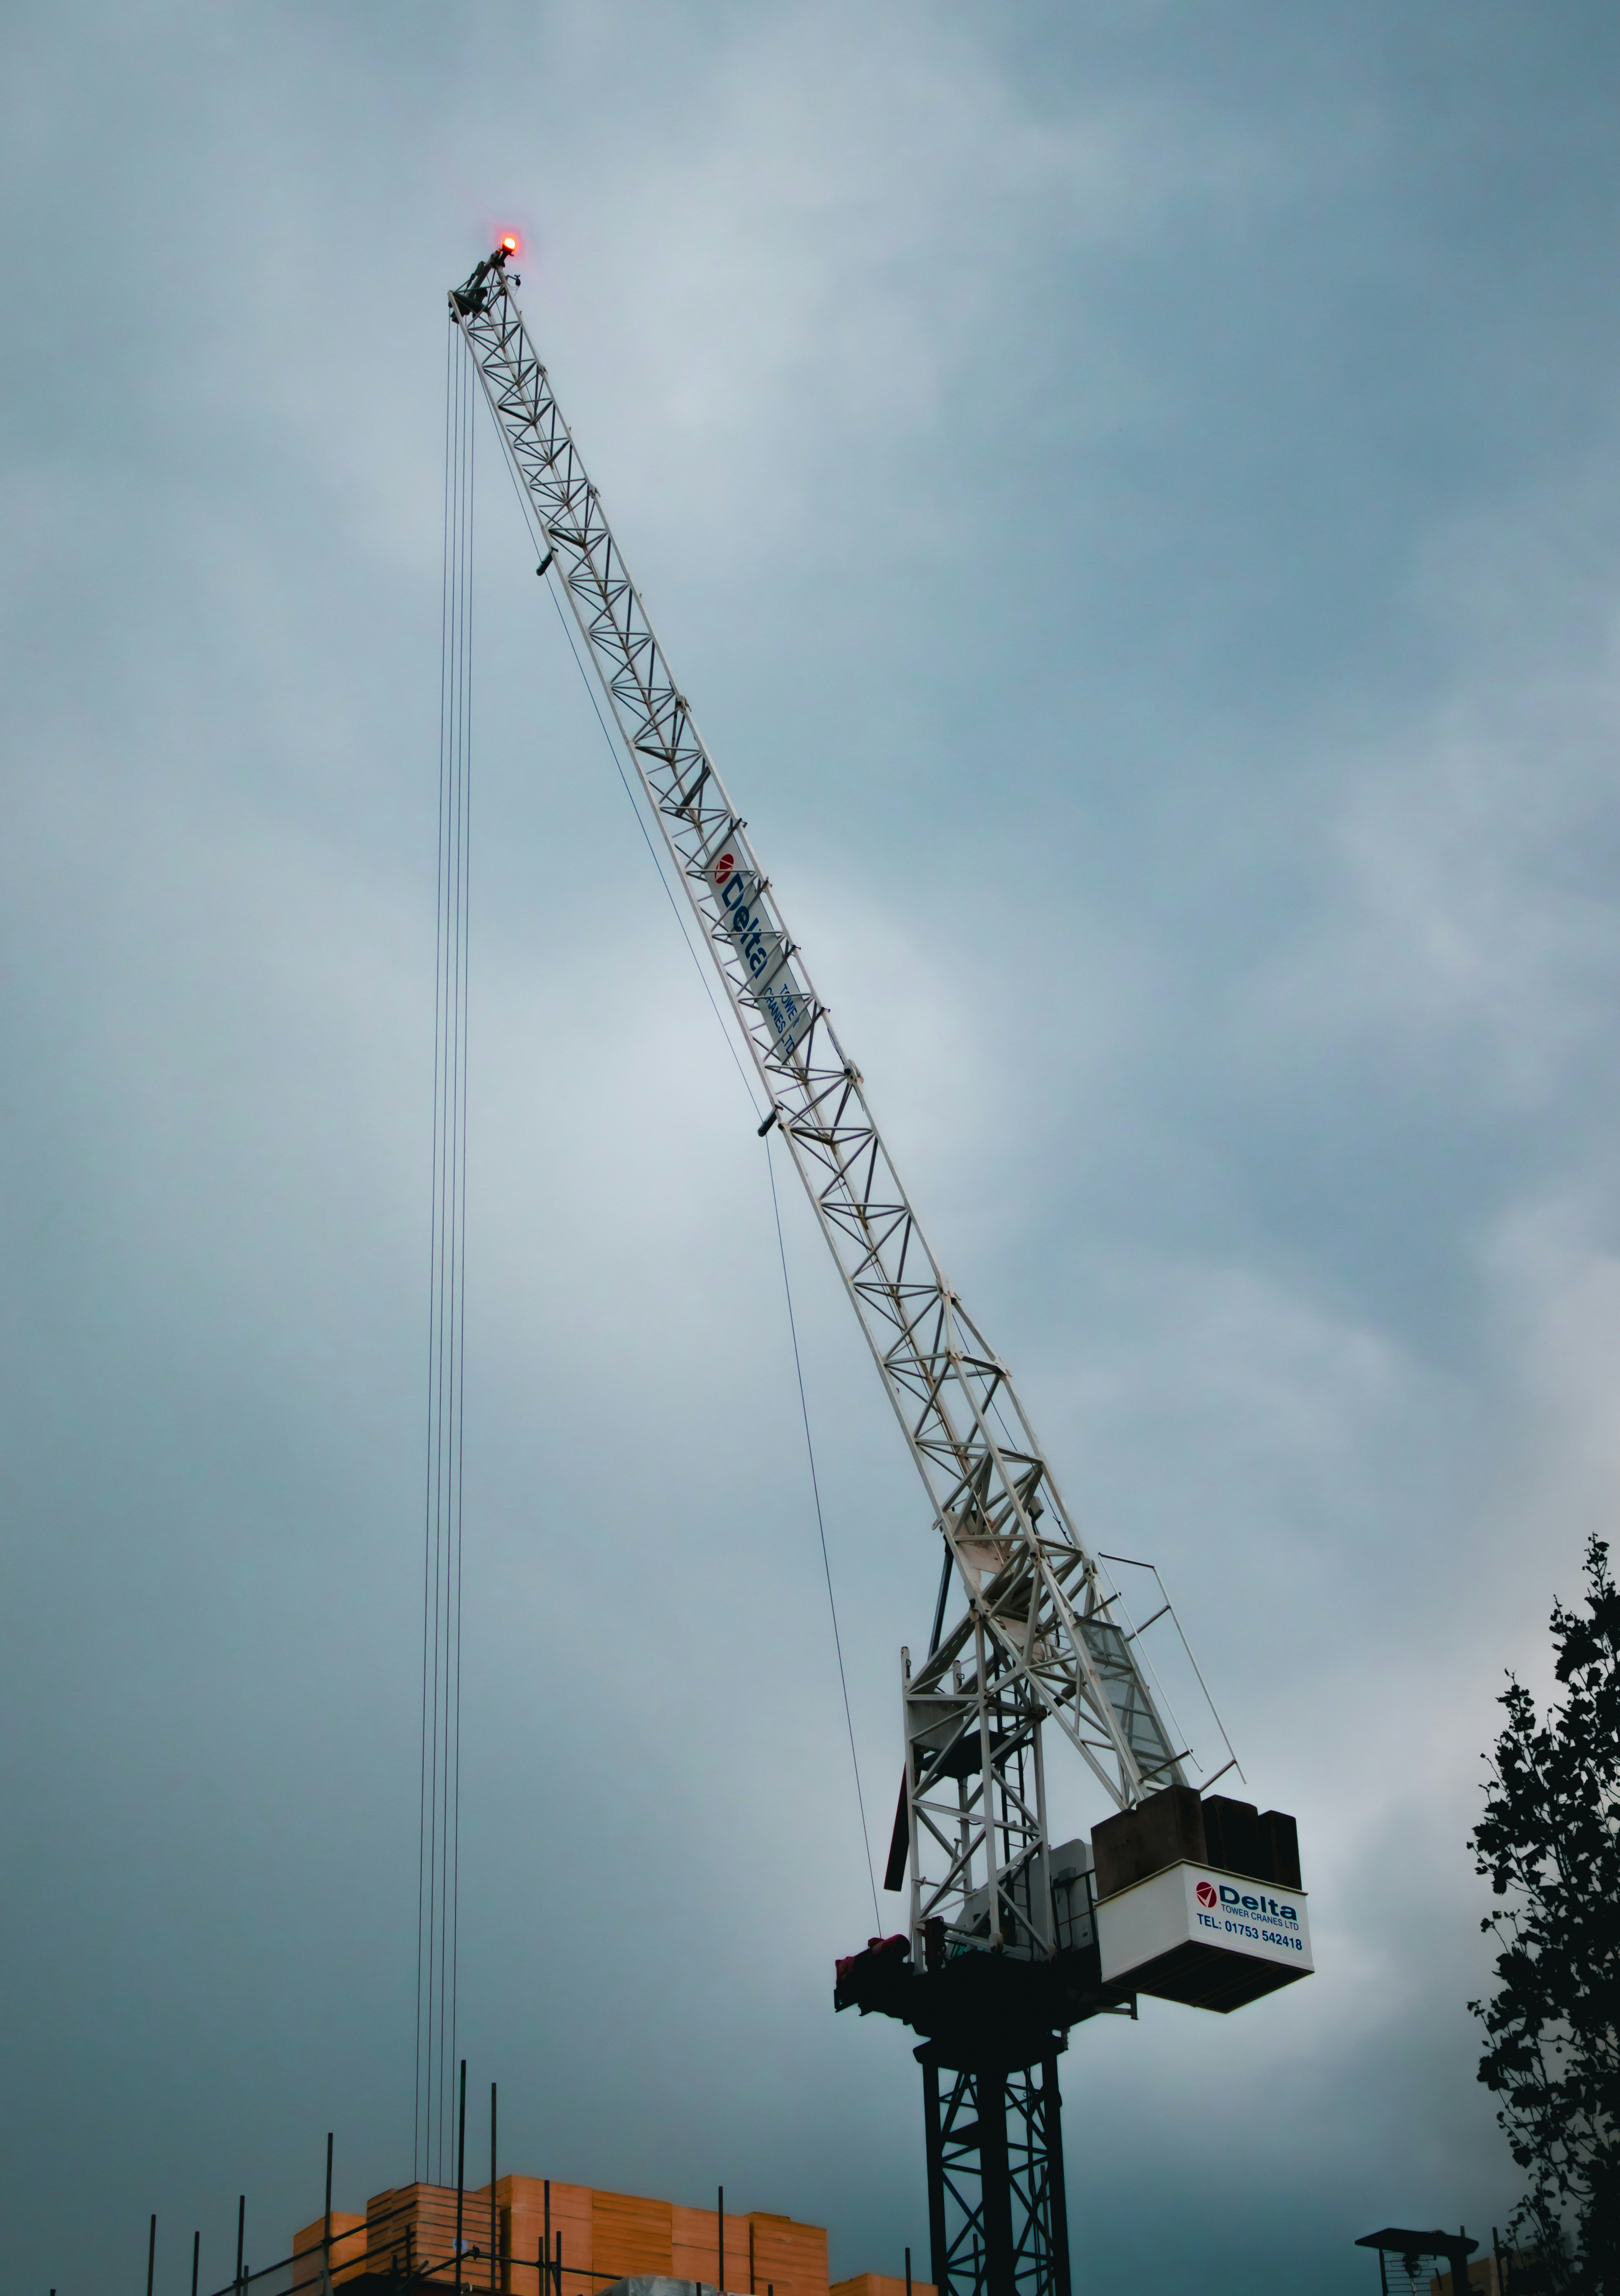 gray steel crane under cloudy sky during daytime